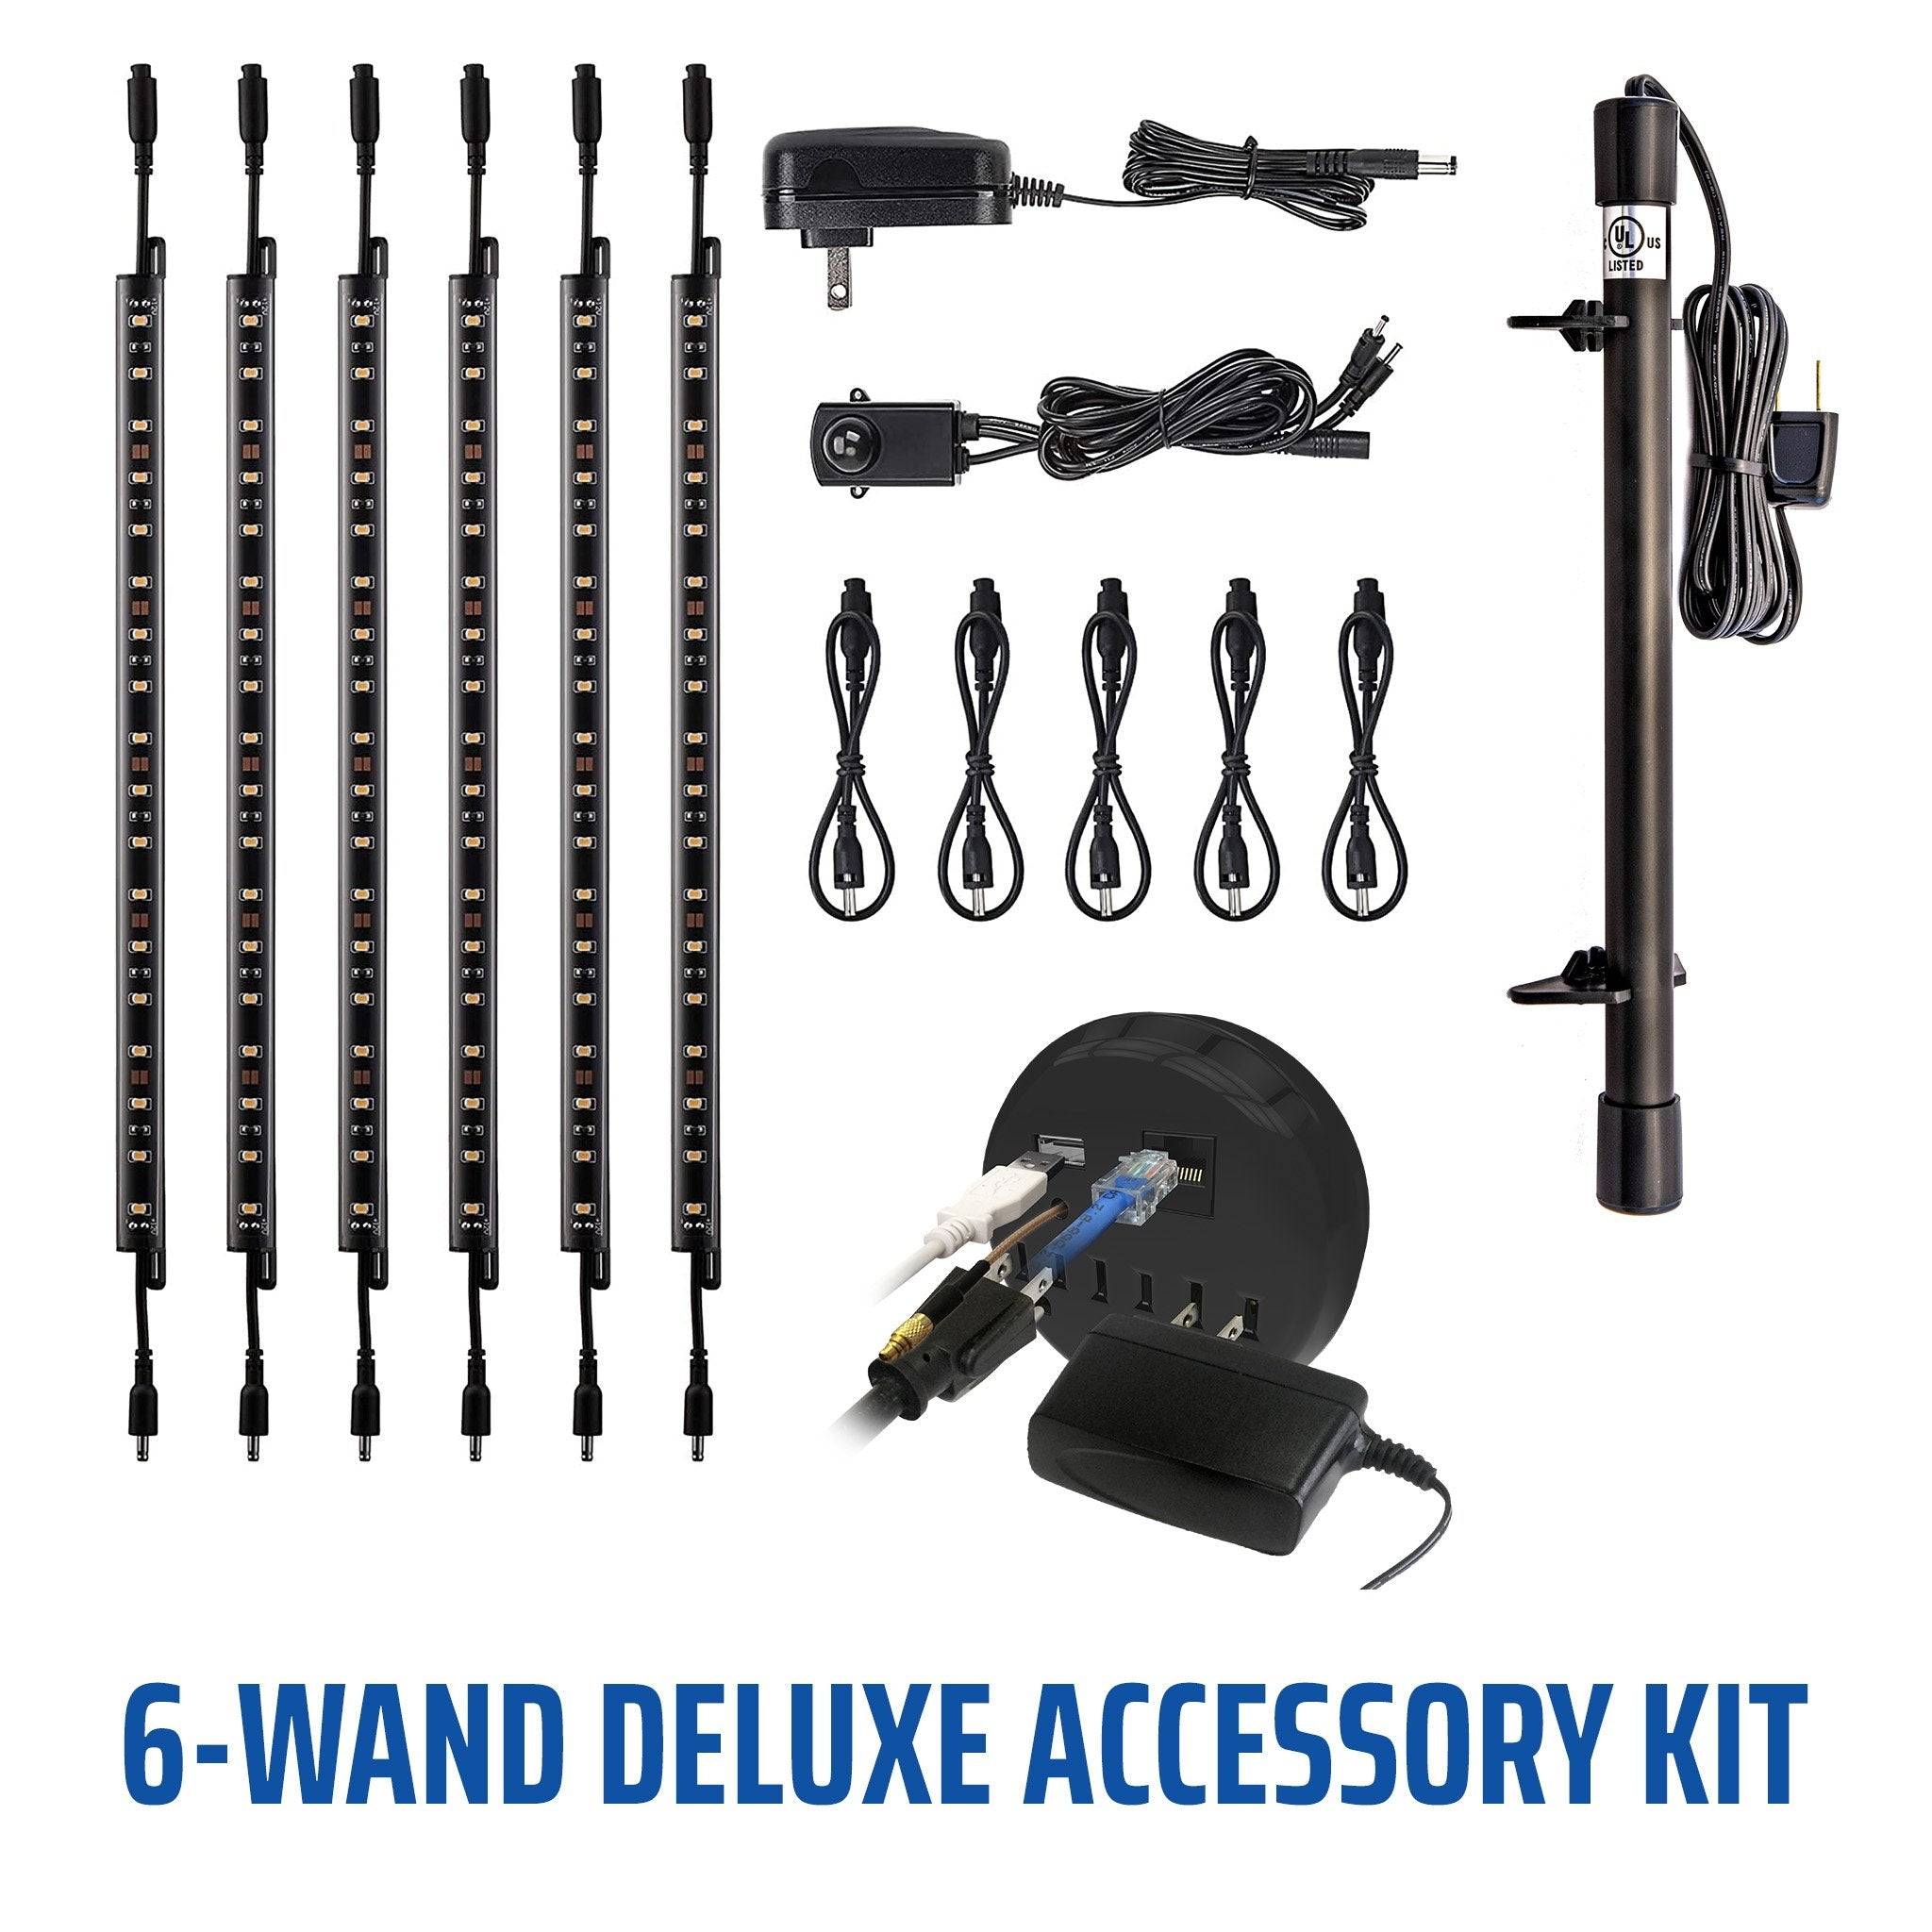 6-WAND DELUXE ACCESSORY KIT